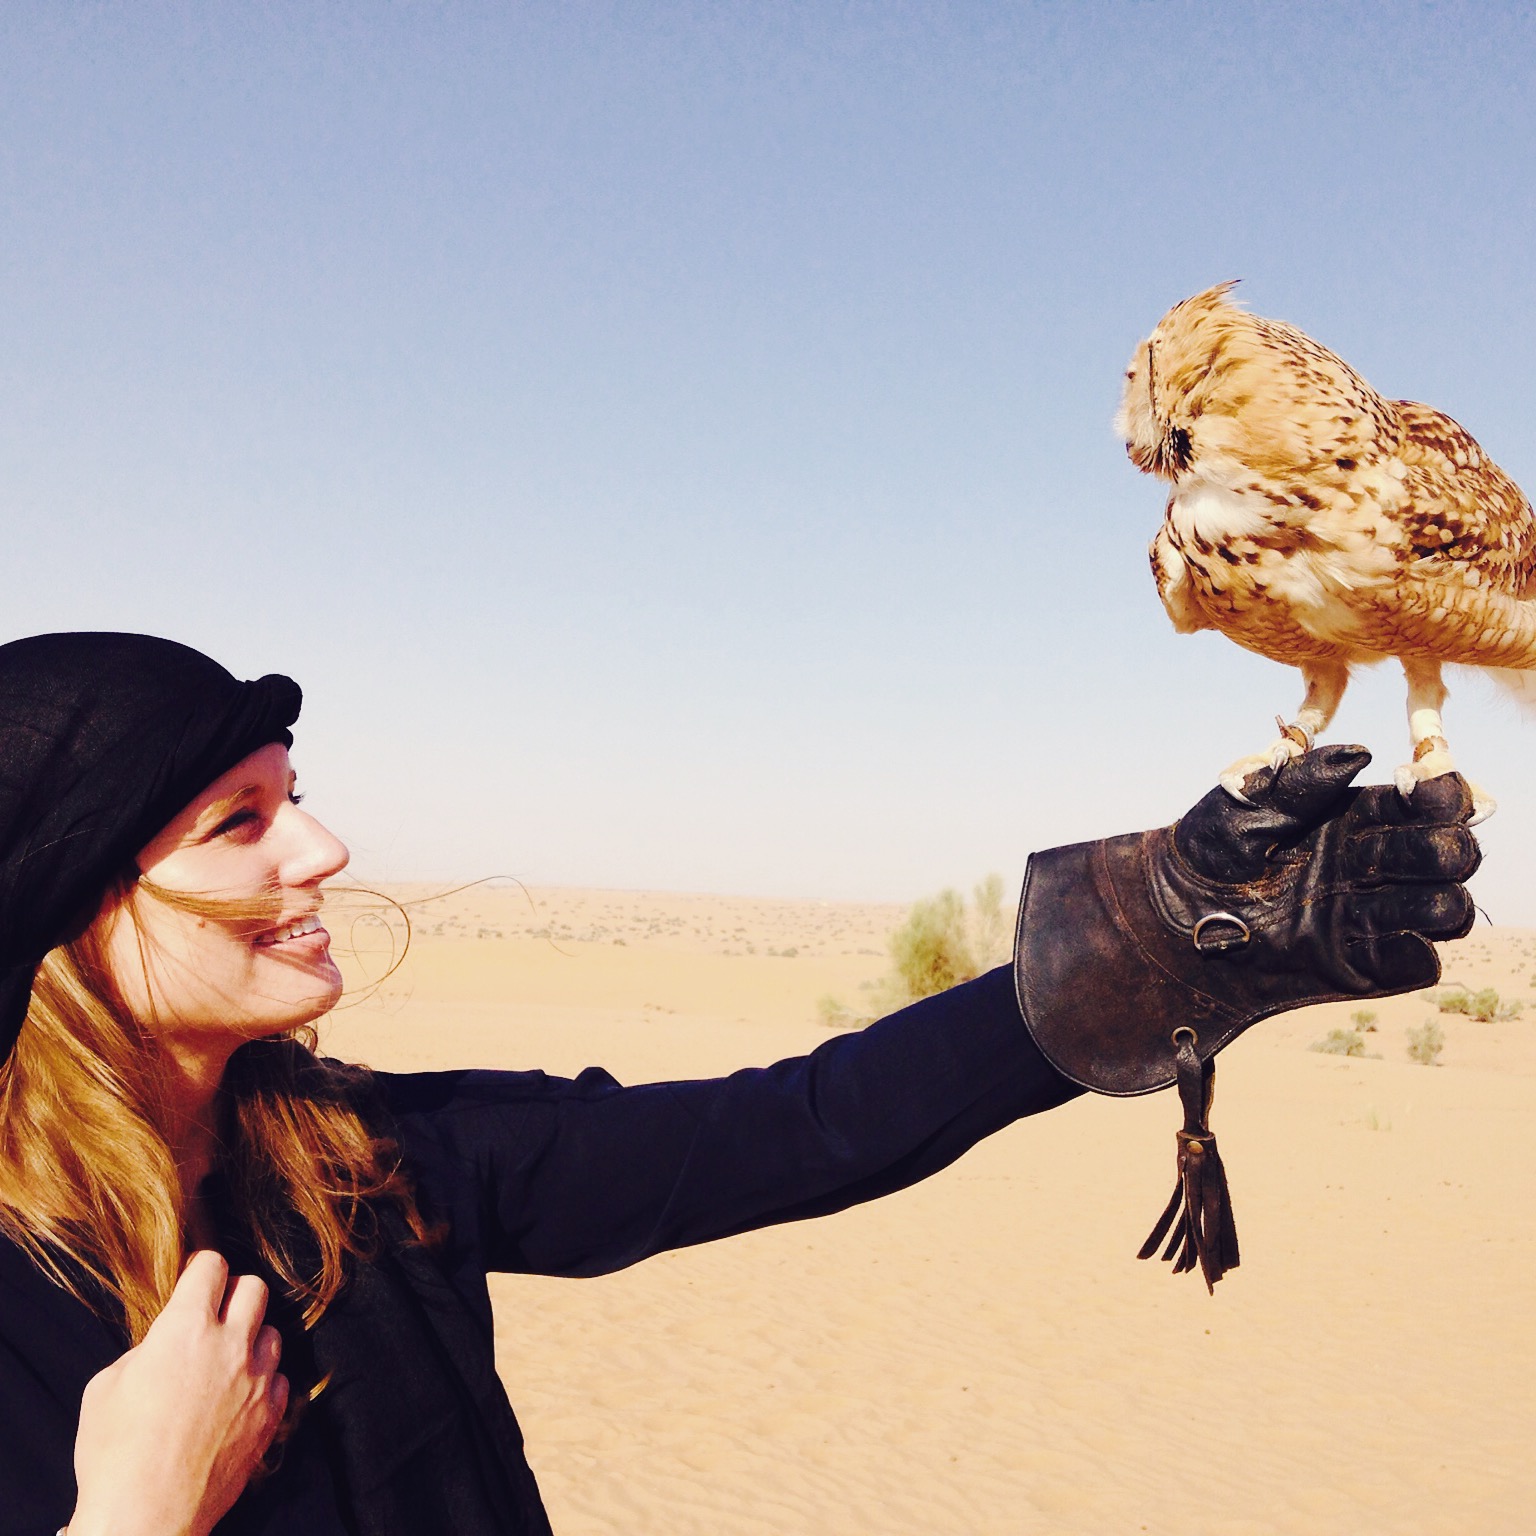 Katherine Conaway at a falconry tour in the desert outside of Dubai (Courtesy of Katherine Conaway)